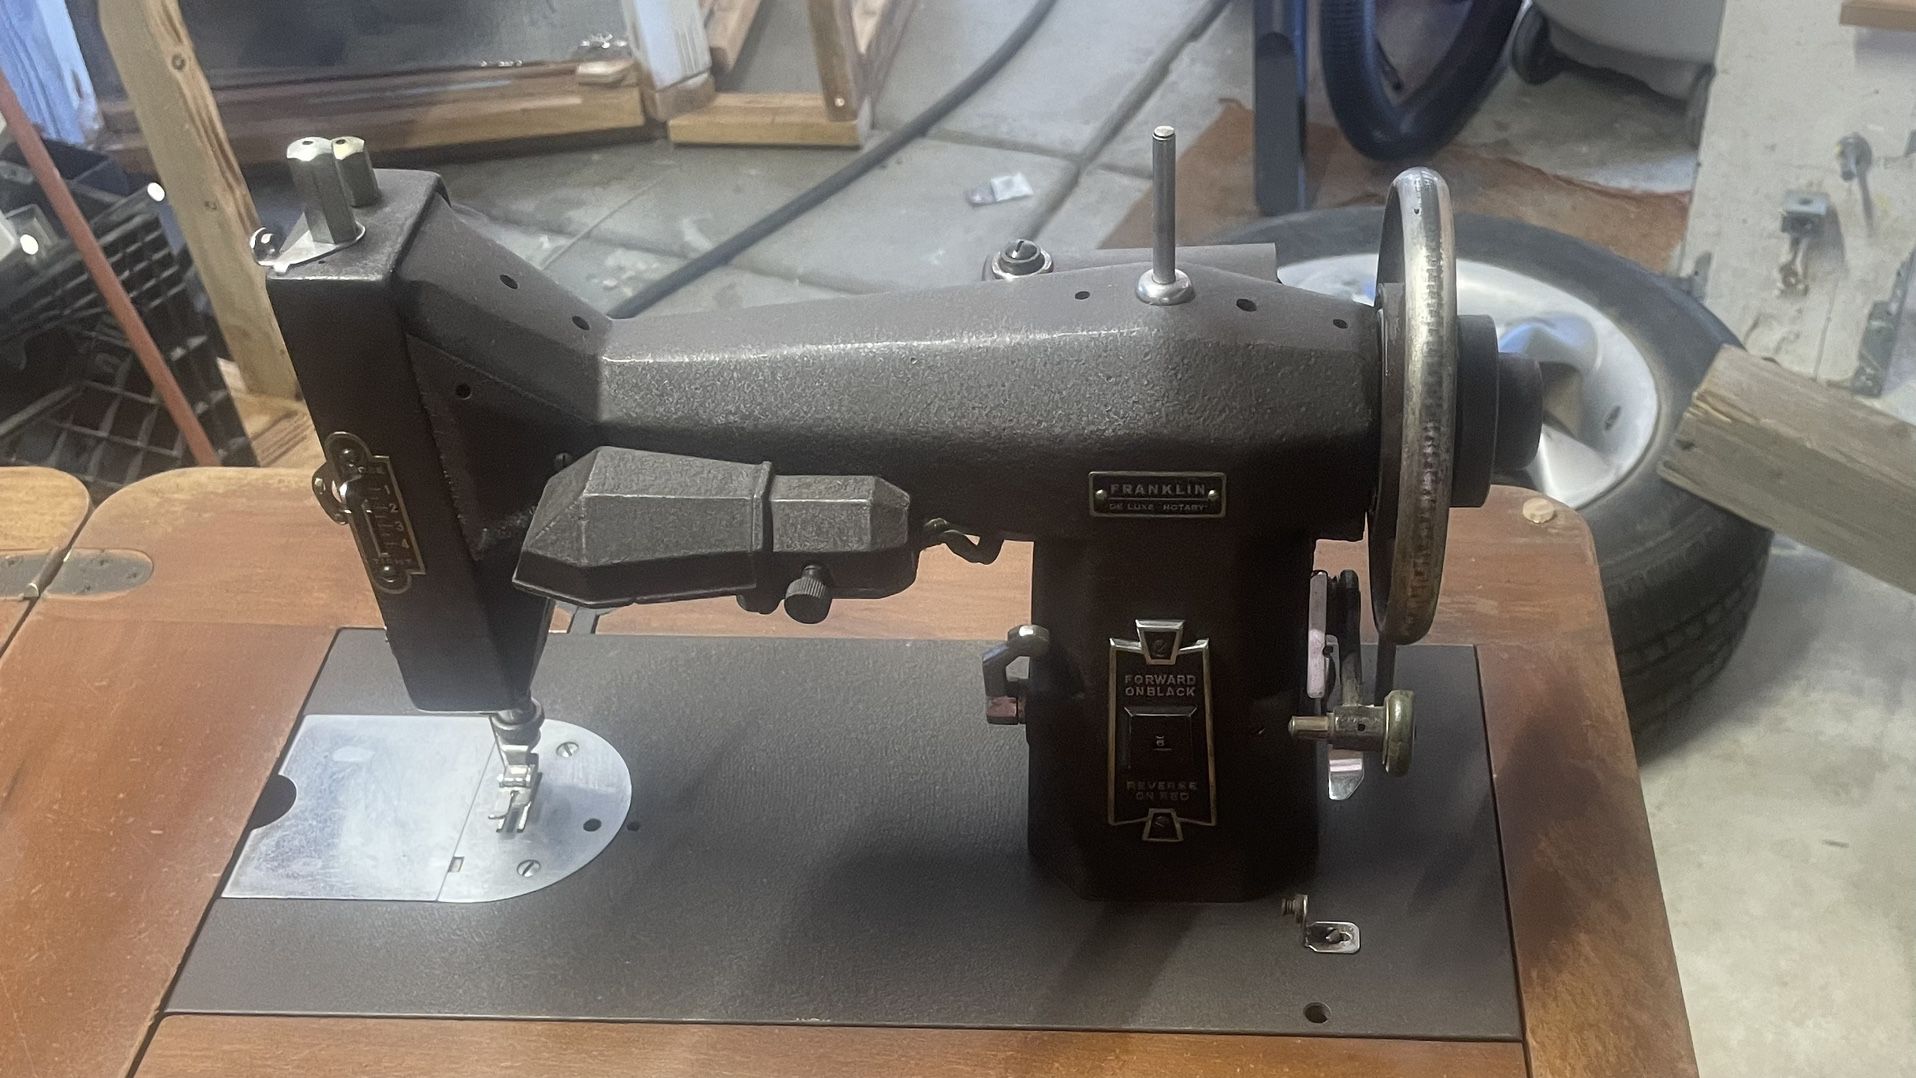 Vintage Kenmore Electric Rotary Sewing Machine for Sale in Anaheim, CA -  OfferUp